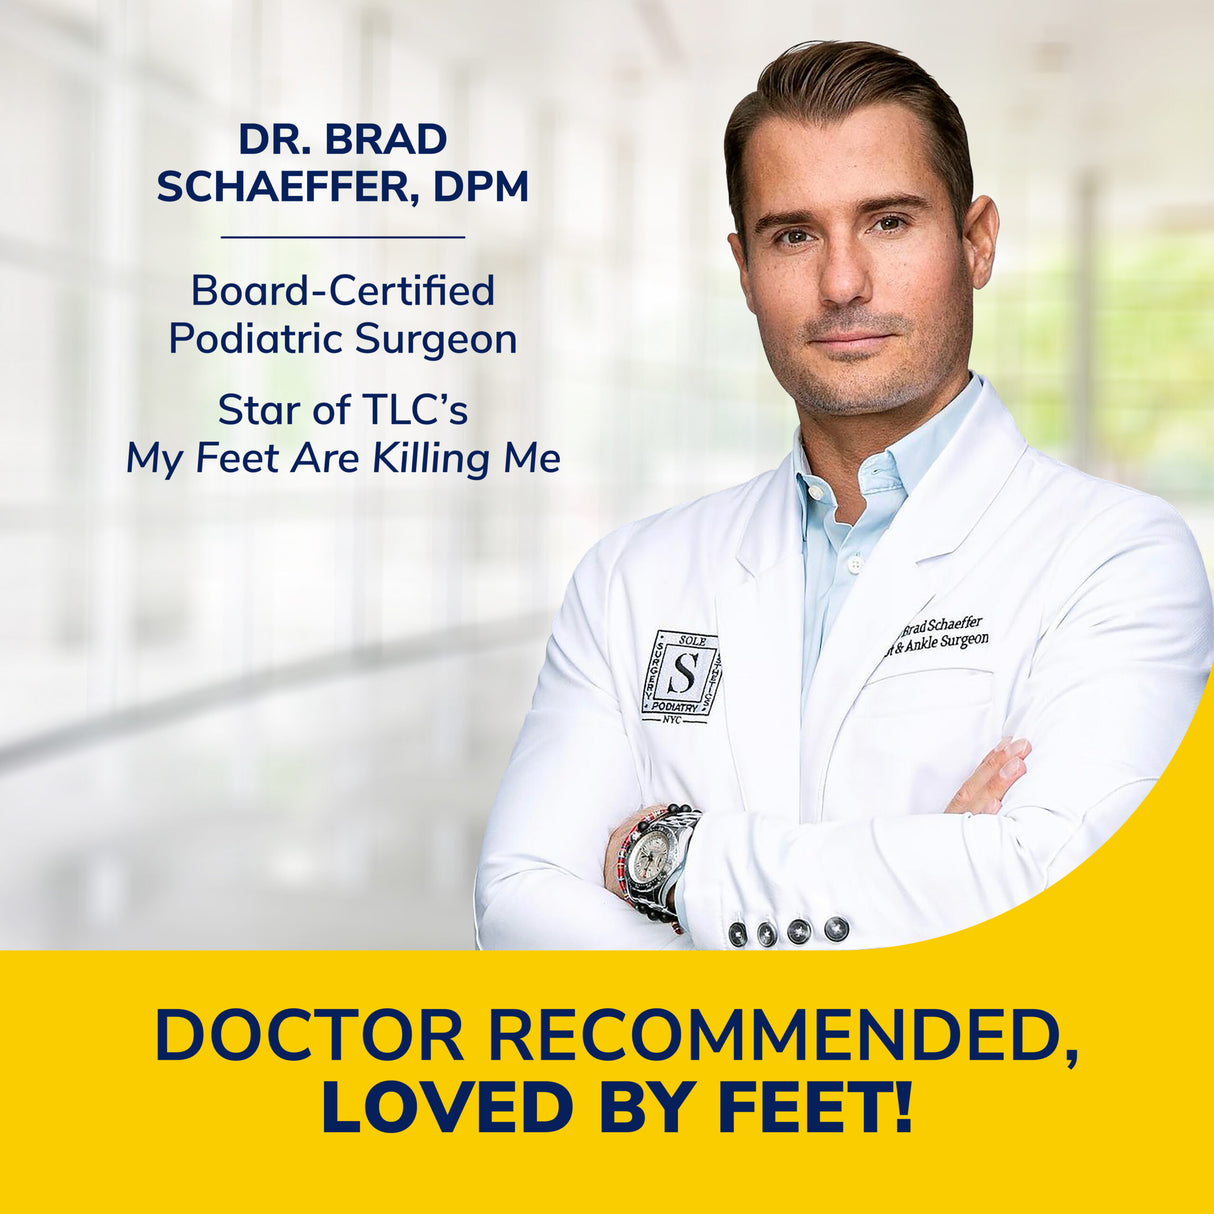 image of dr recommended loved by feet